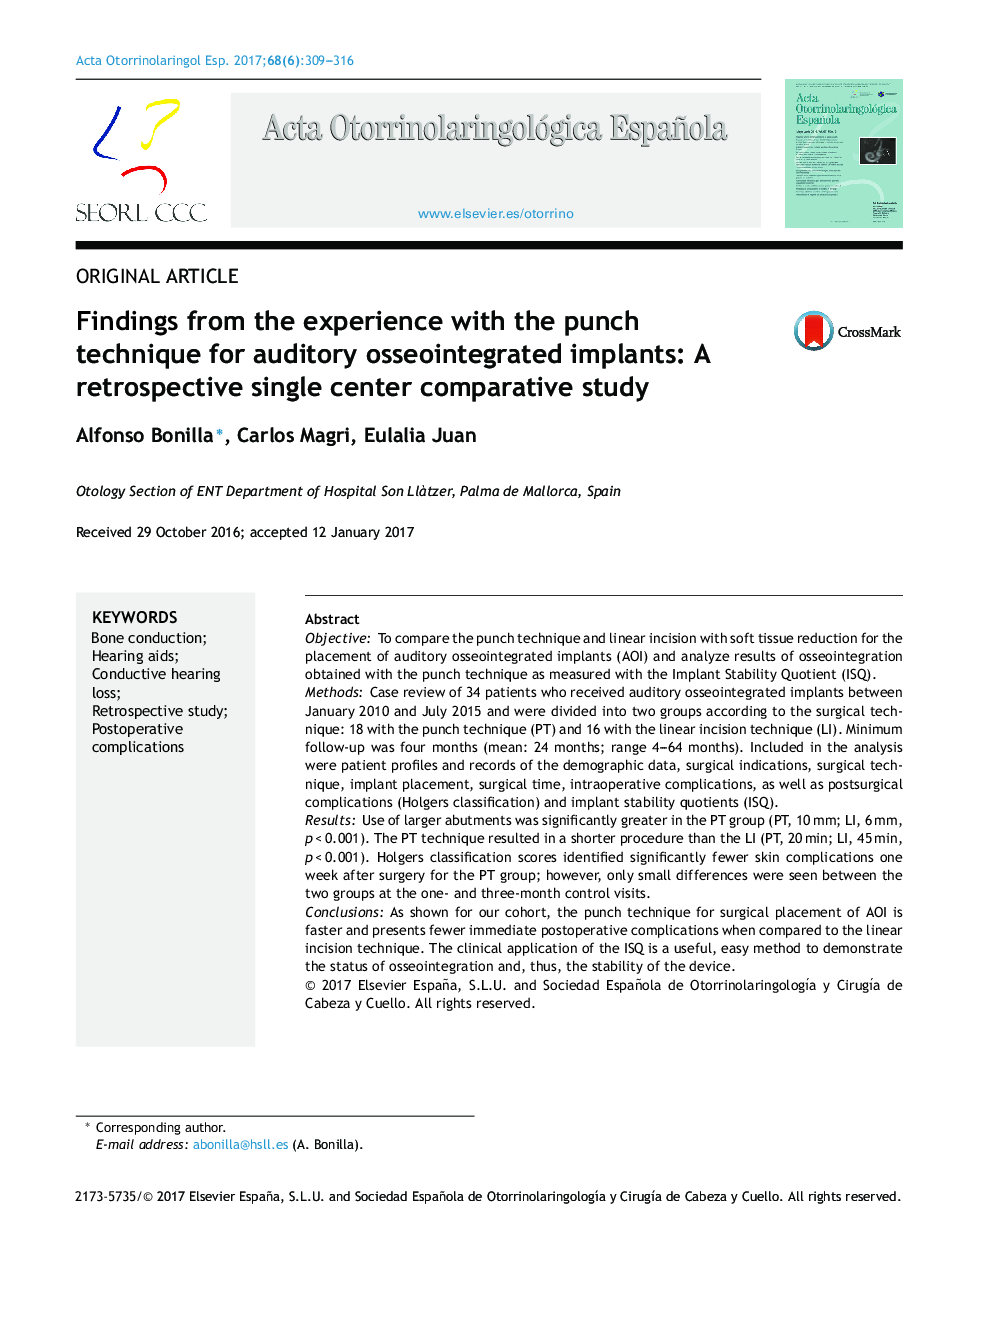 Findings from the experience with the punch technique for auditory osseointegrated implants: A retrospective single center comparative study